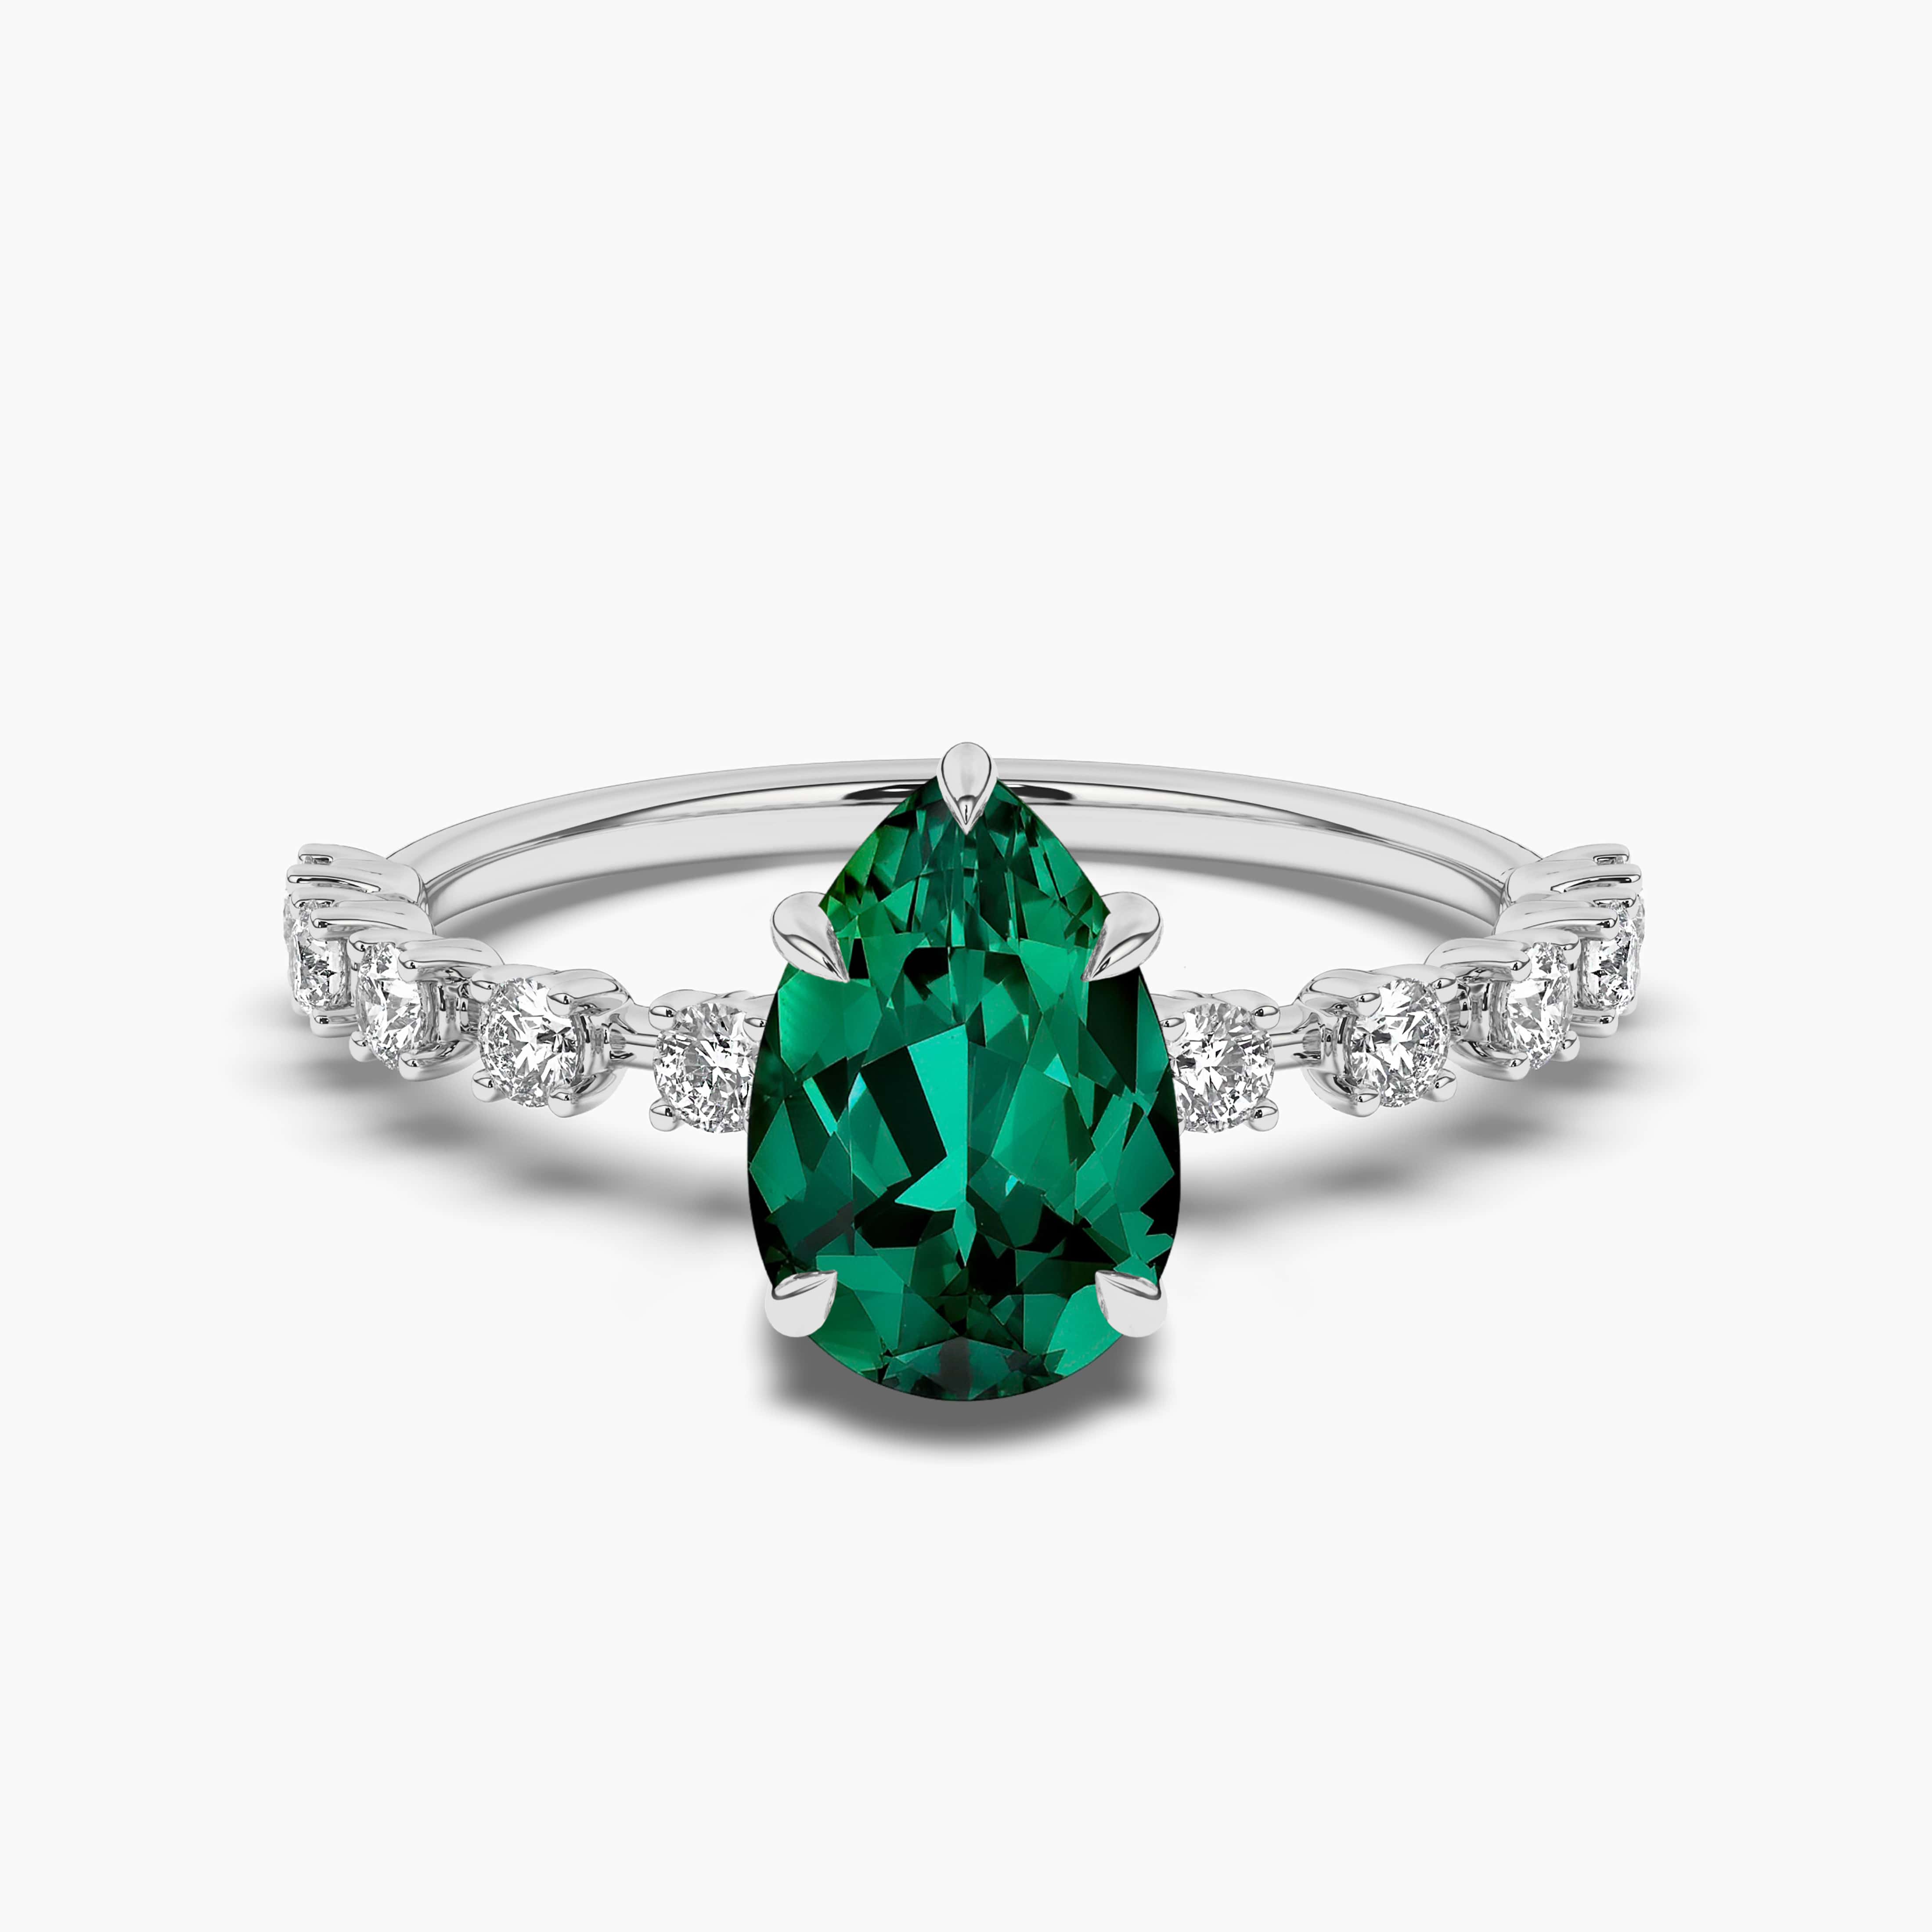 PEAR SHAPE EMERALD SOLITAIRE IN WHITE GOLD